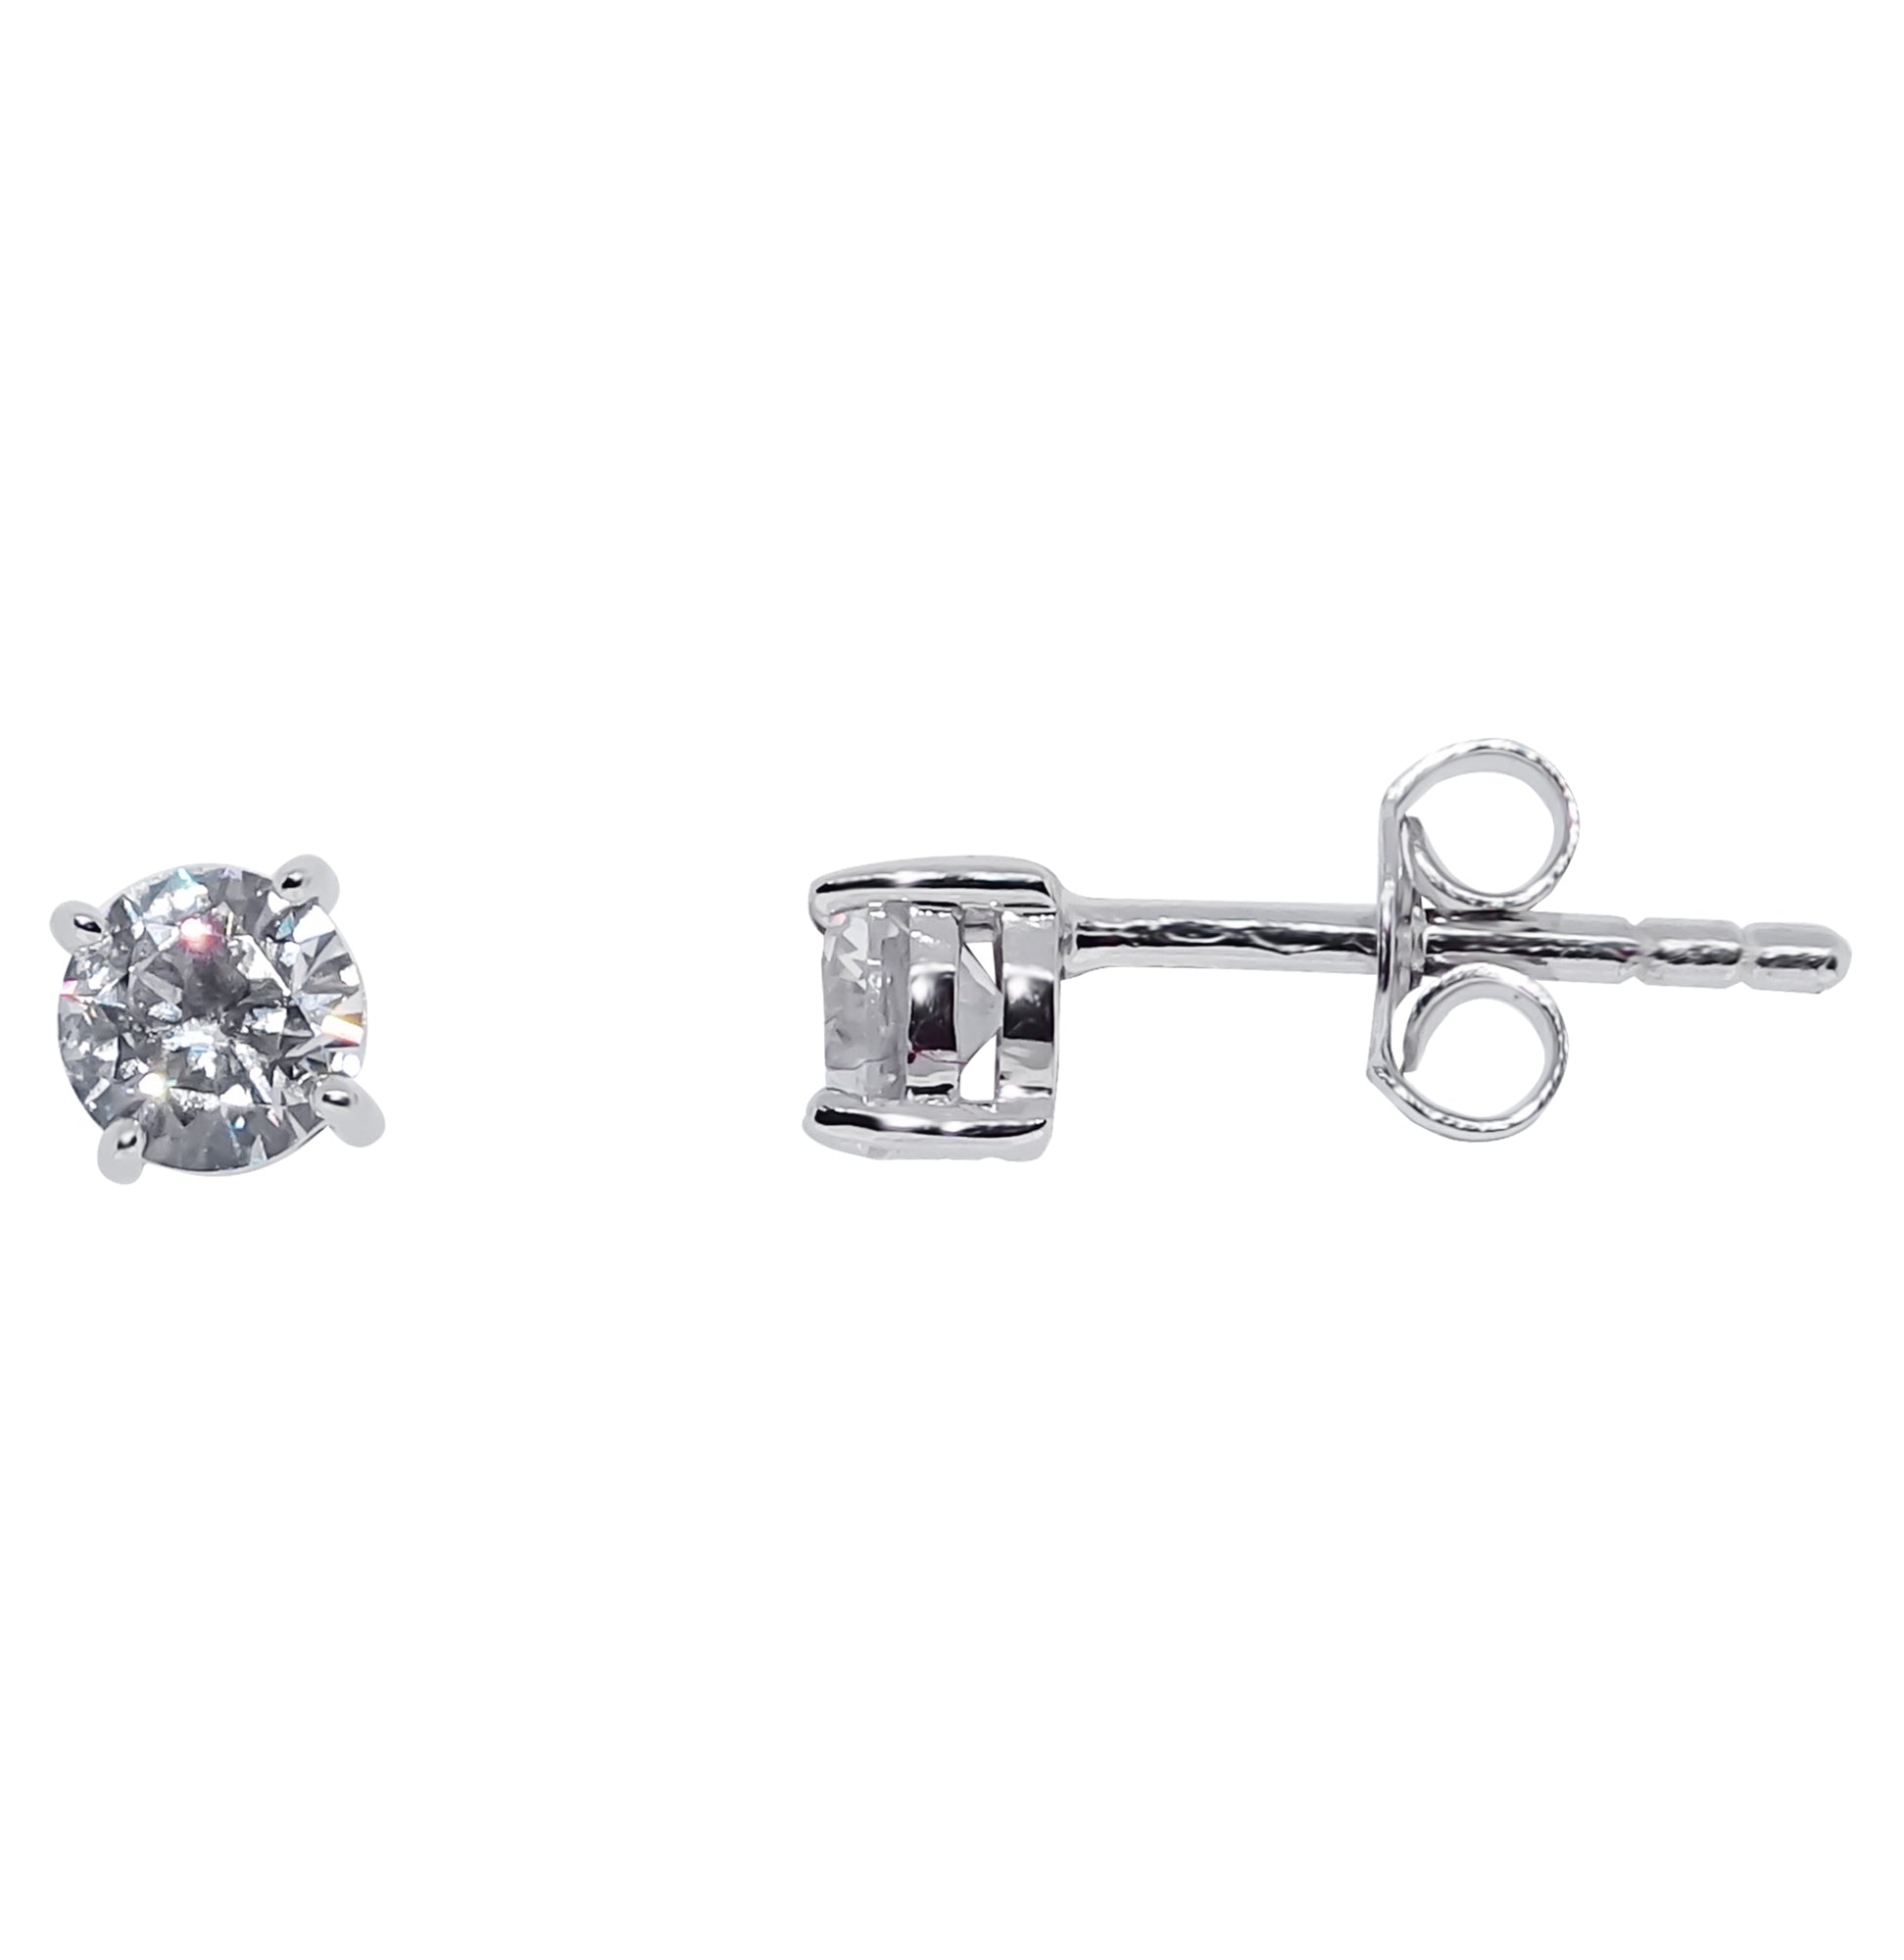 9ct white gold 4mm round cz stud earrings